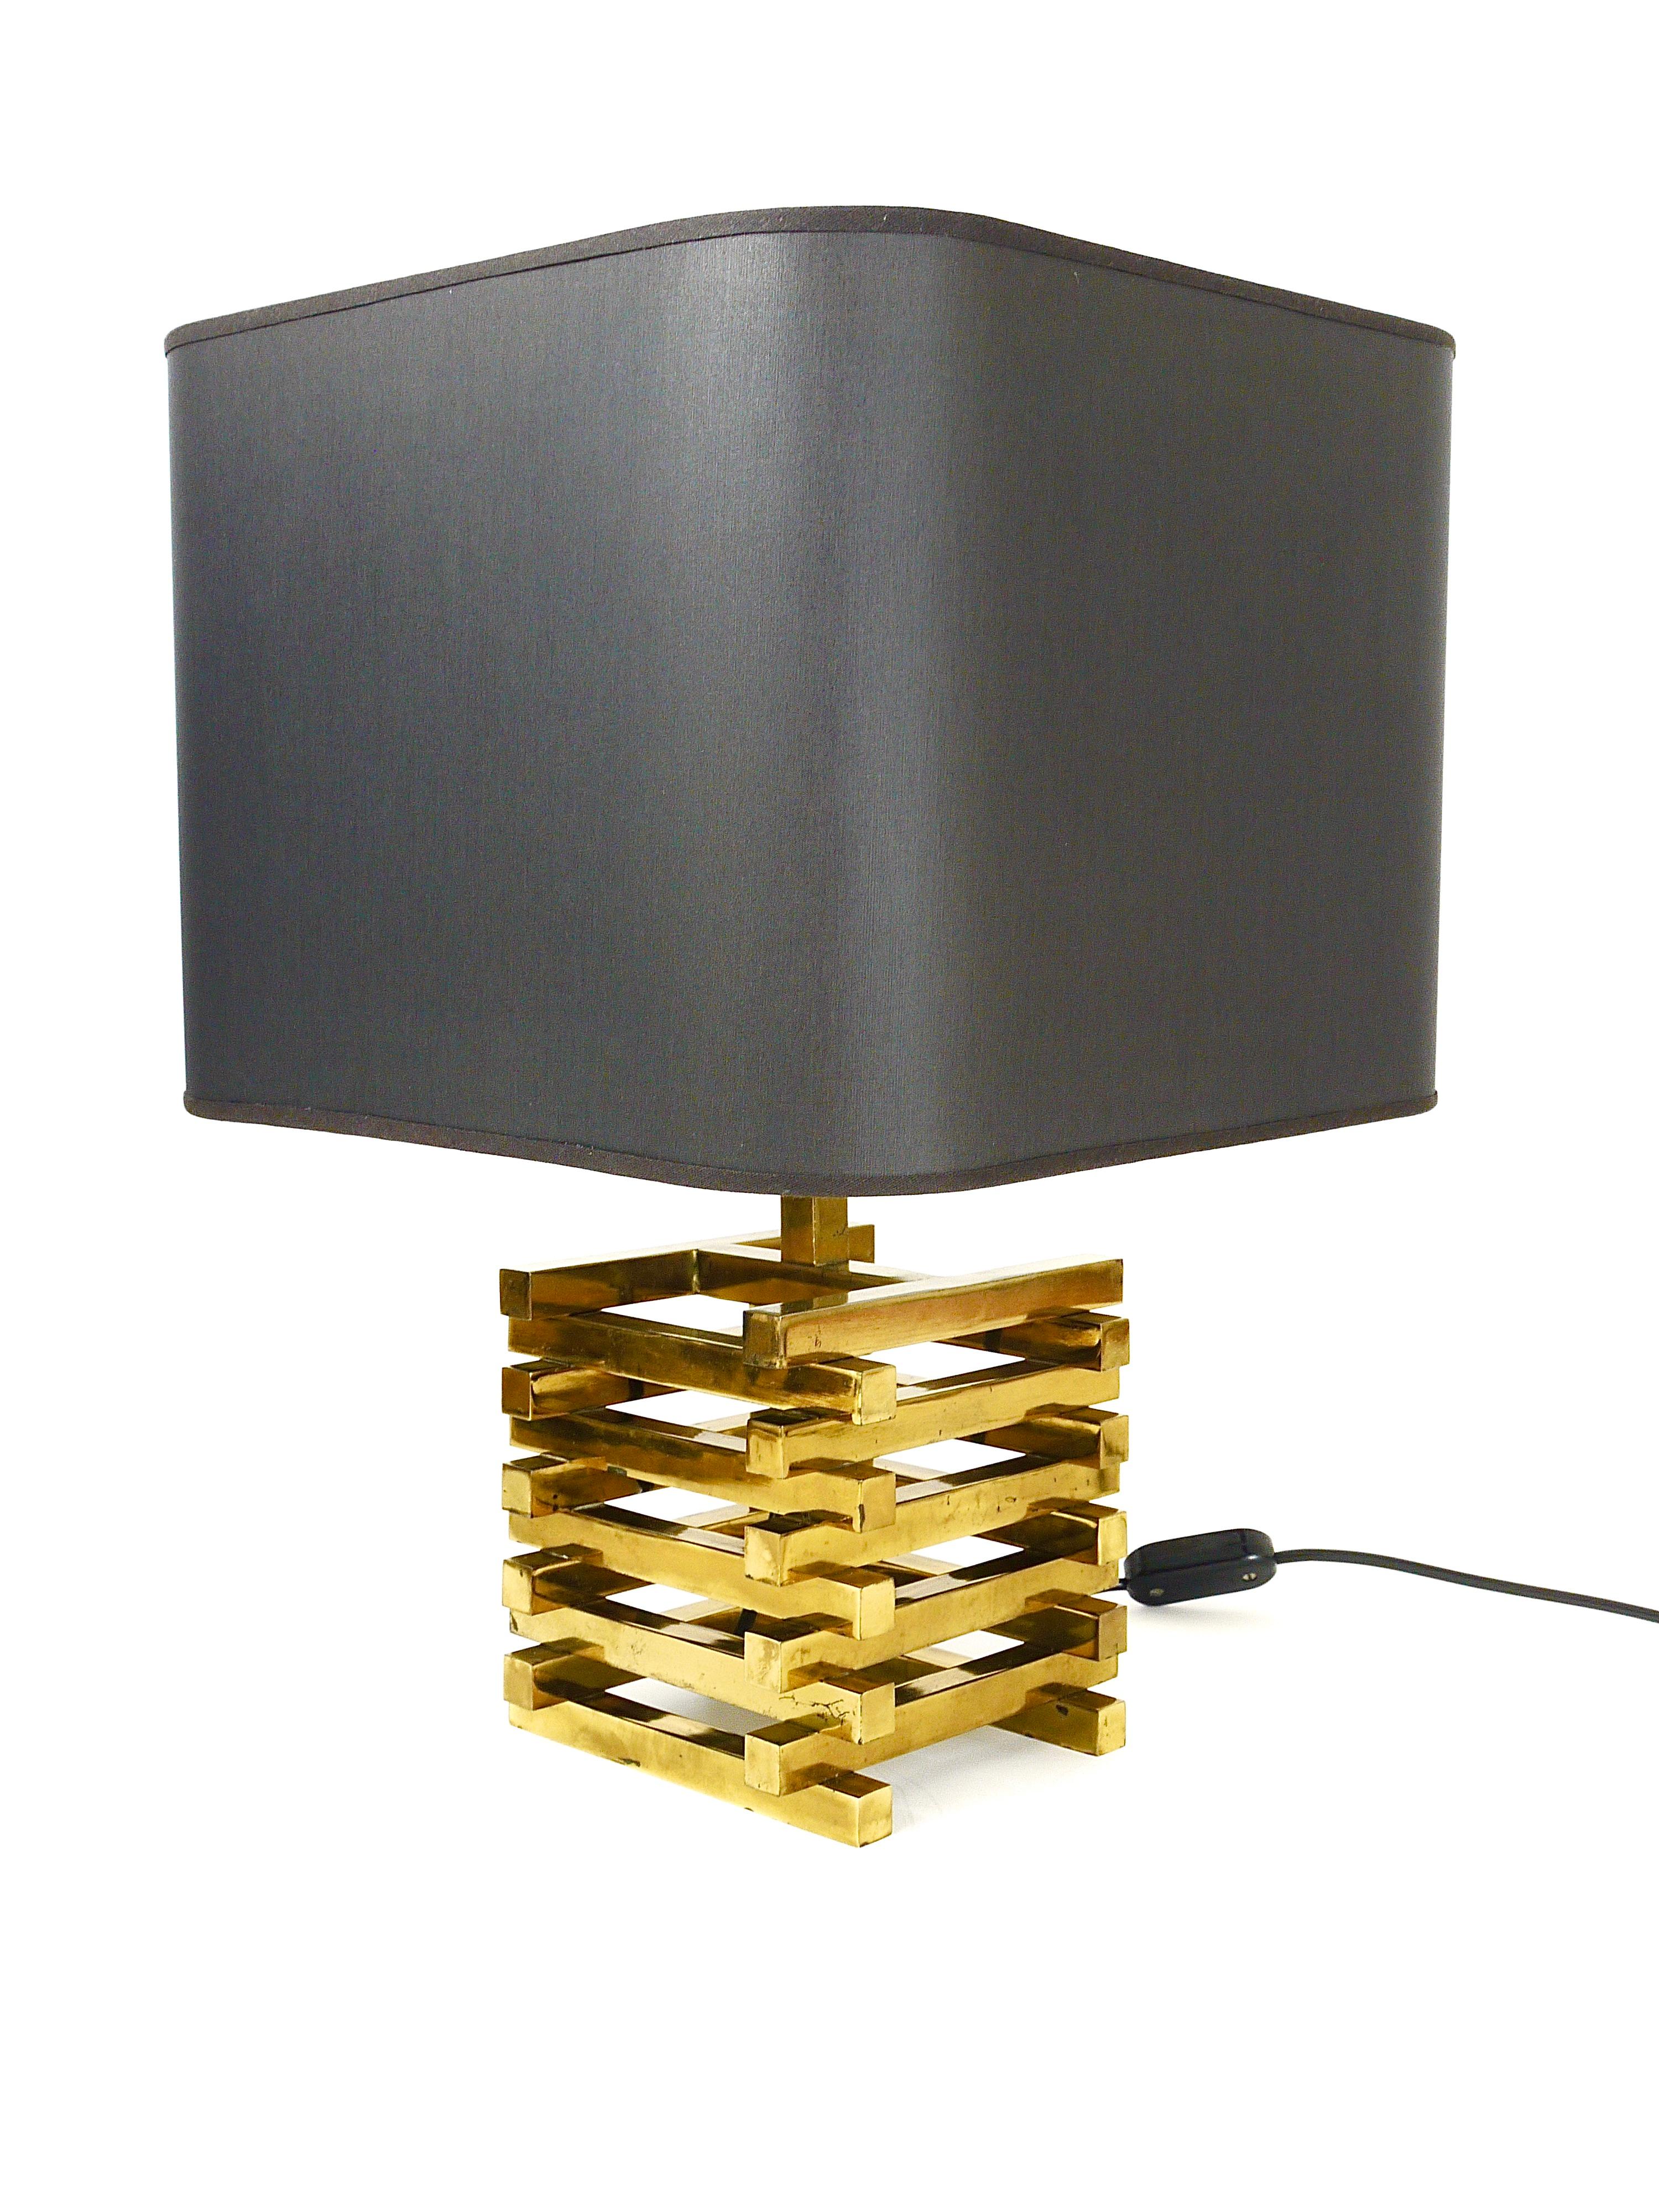 Pair Romeo Rega Midcentury Brass Table Lamps, Italy, 1970s For Sale 7